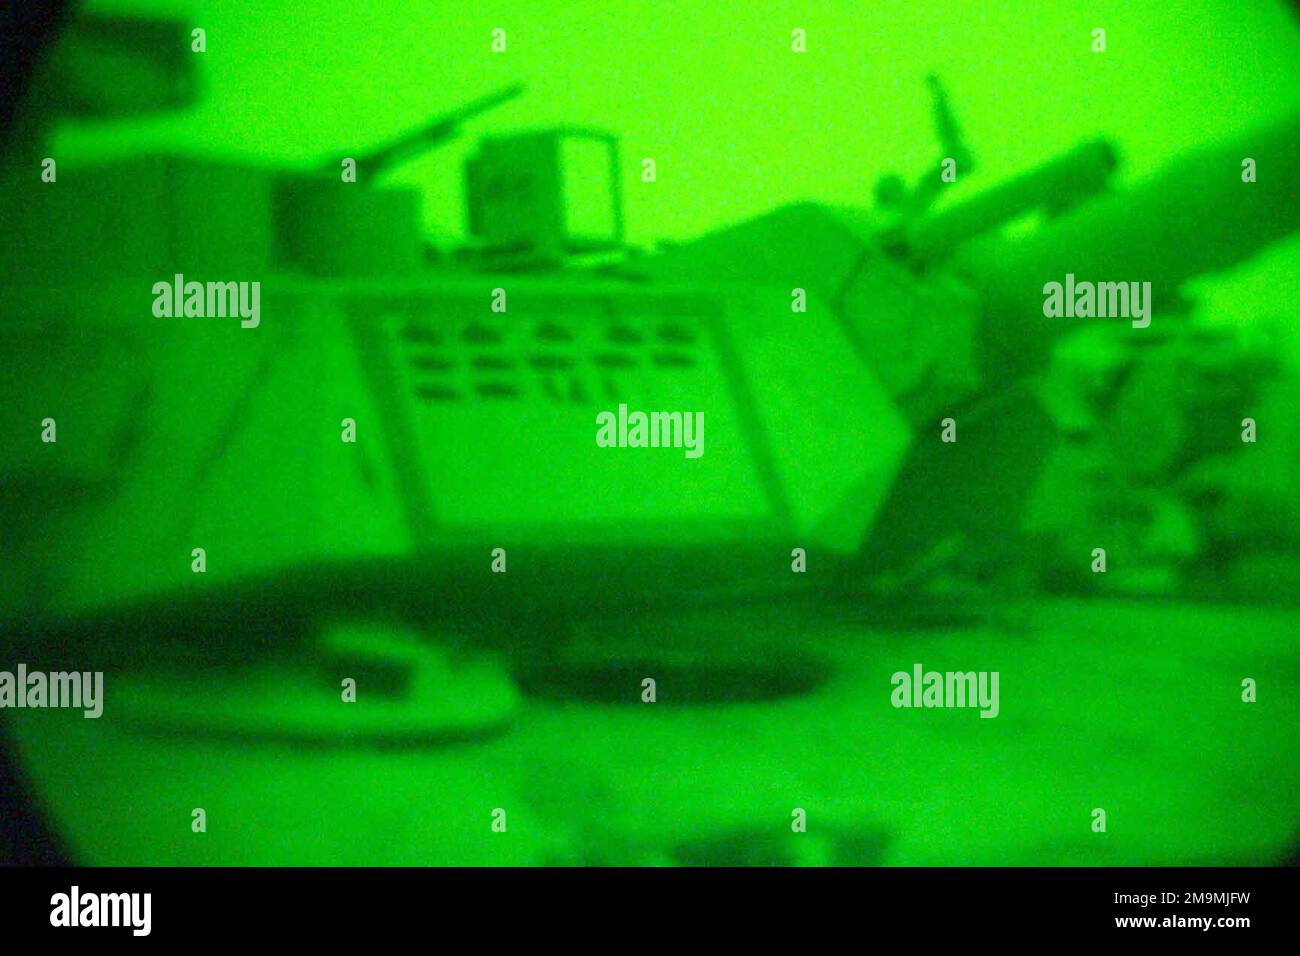 A US Marine Corps (USMC) M1A1 Abrams Main Battle Tank (MBT) from Charlie Company, 1ST Tank Battalion, displays the number of kills it has, on its turret thermal panel during Operation IRAQI FREEDOM. Subject Operation/Series: IRAQI FREEDOM Country: Iraq (IRQ) Stock Photo